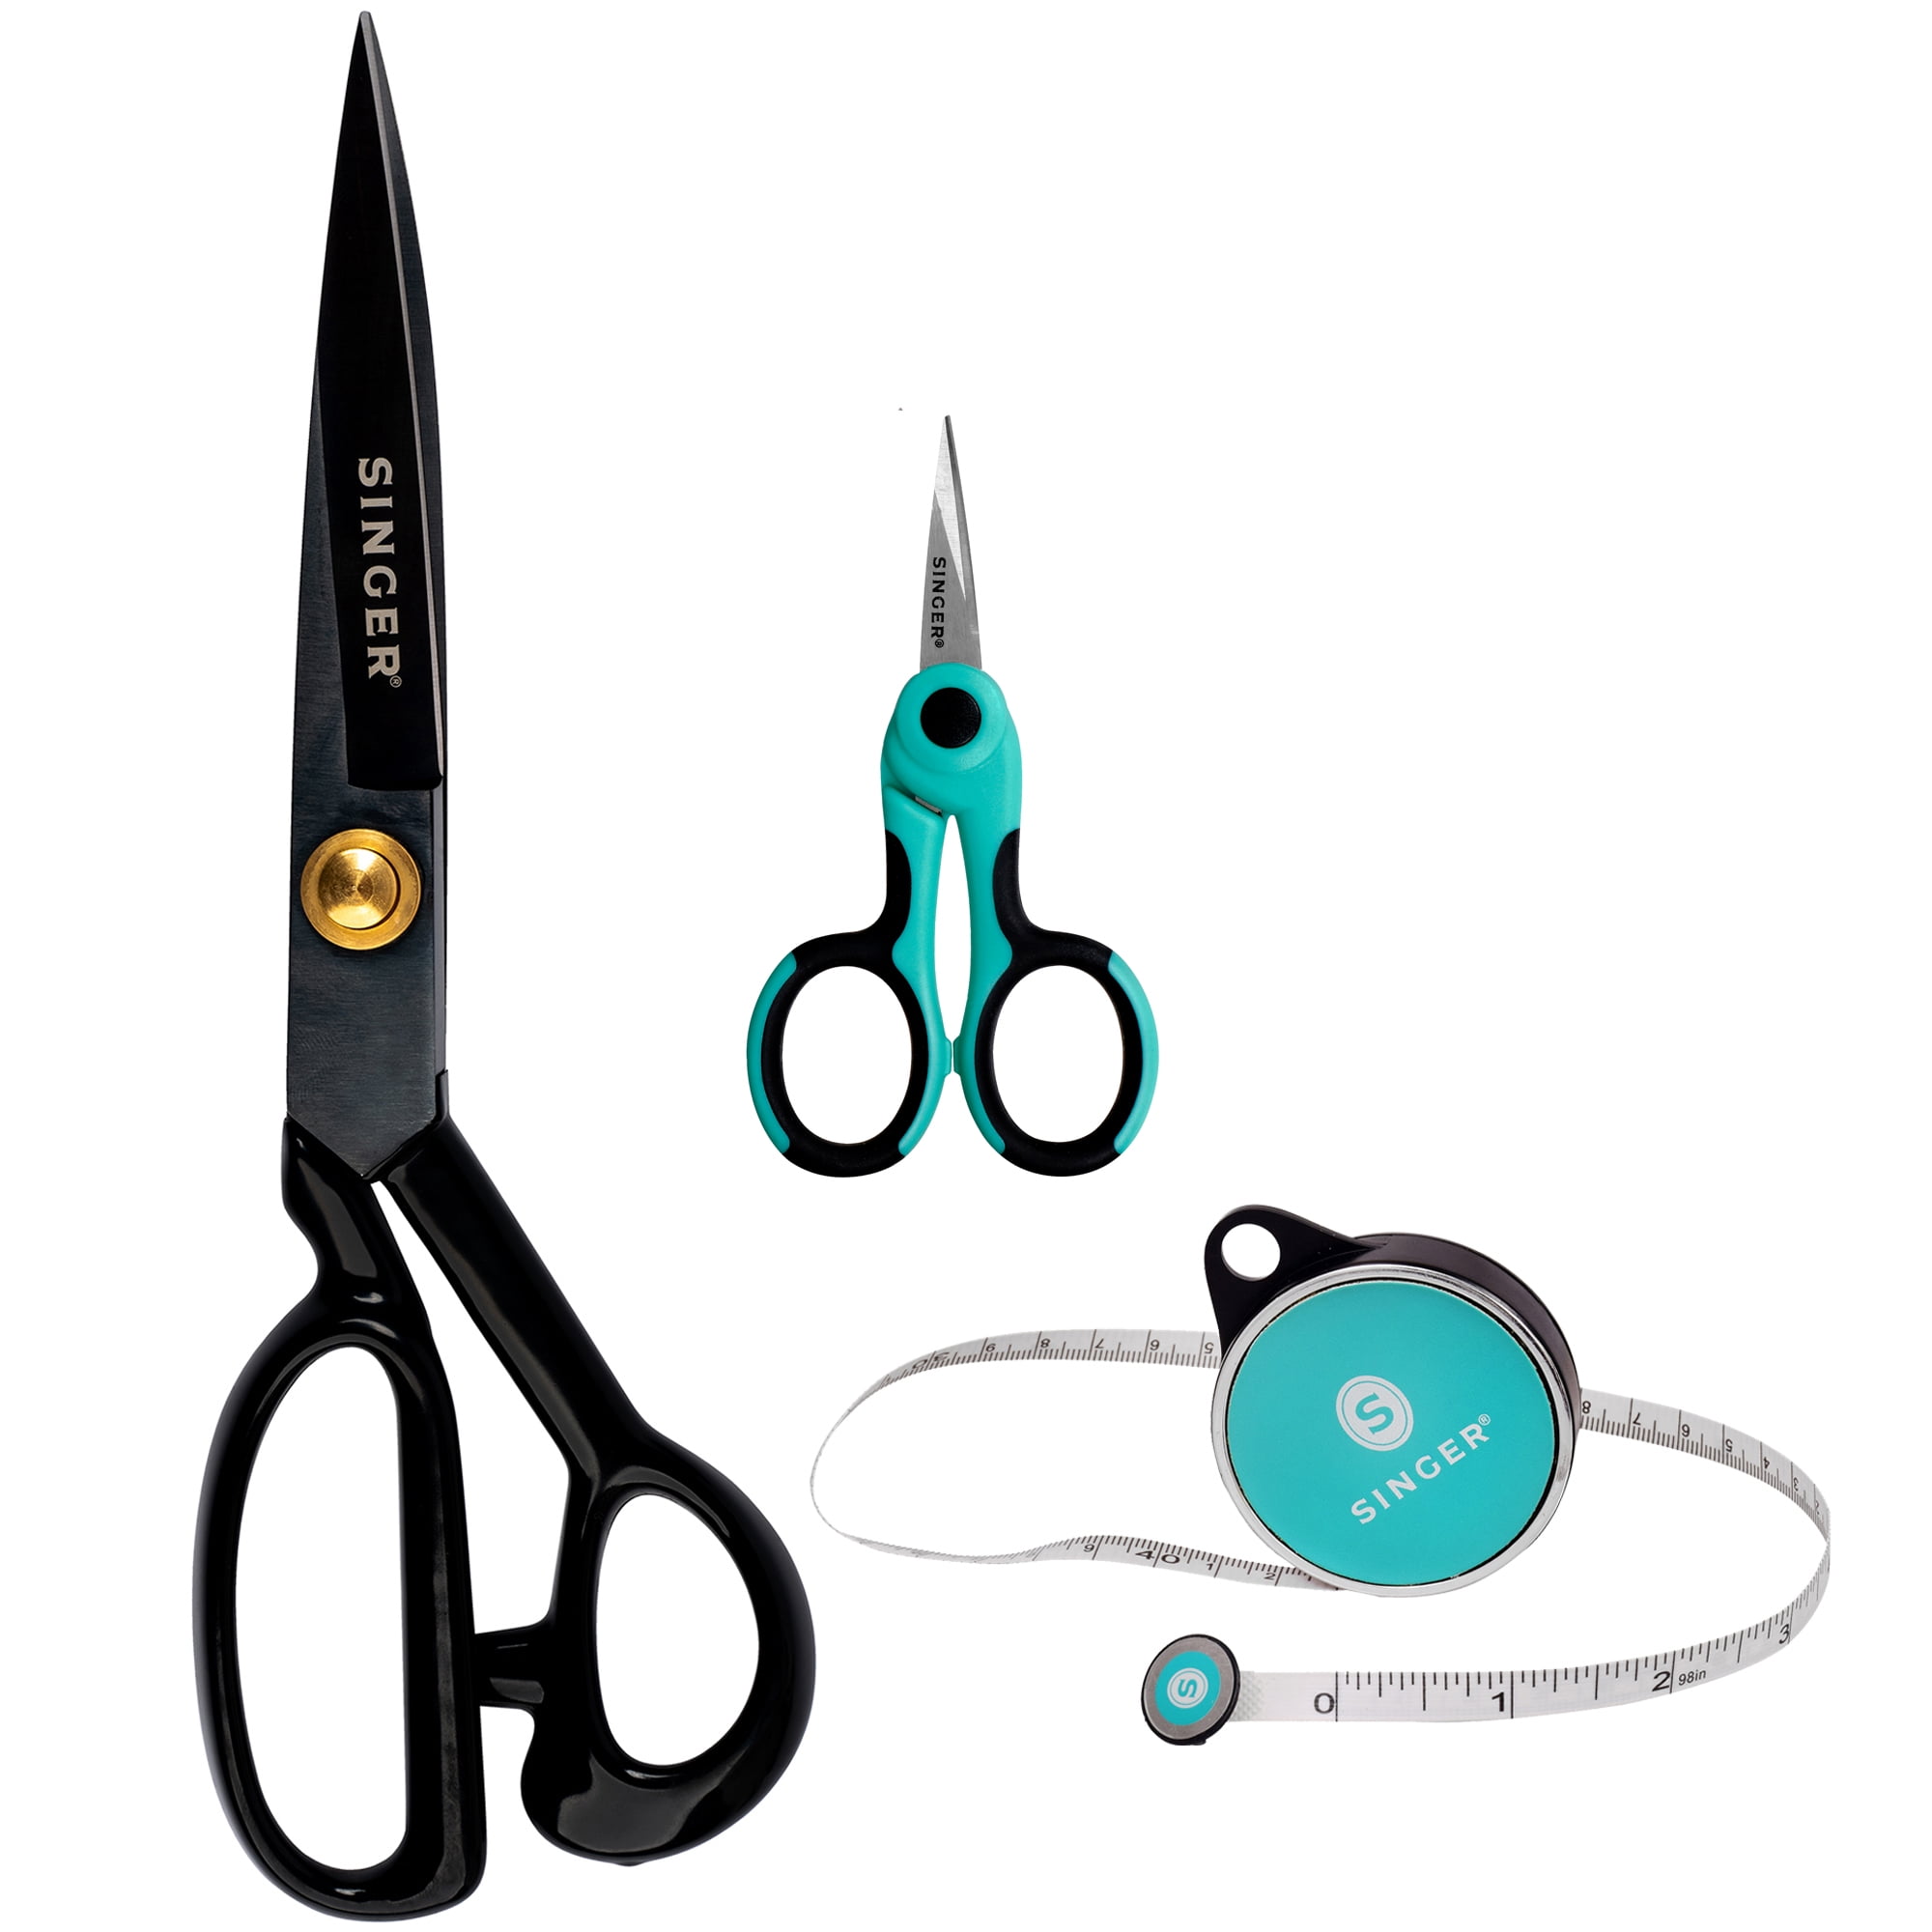 Singer 3PC Teal ProSeries Measure Mark Cut Sewing Tool Set - Sewing Fabric Scissors & Fabric Shears - Sewing Supplies